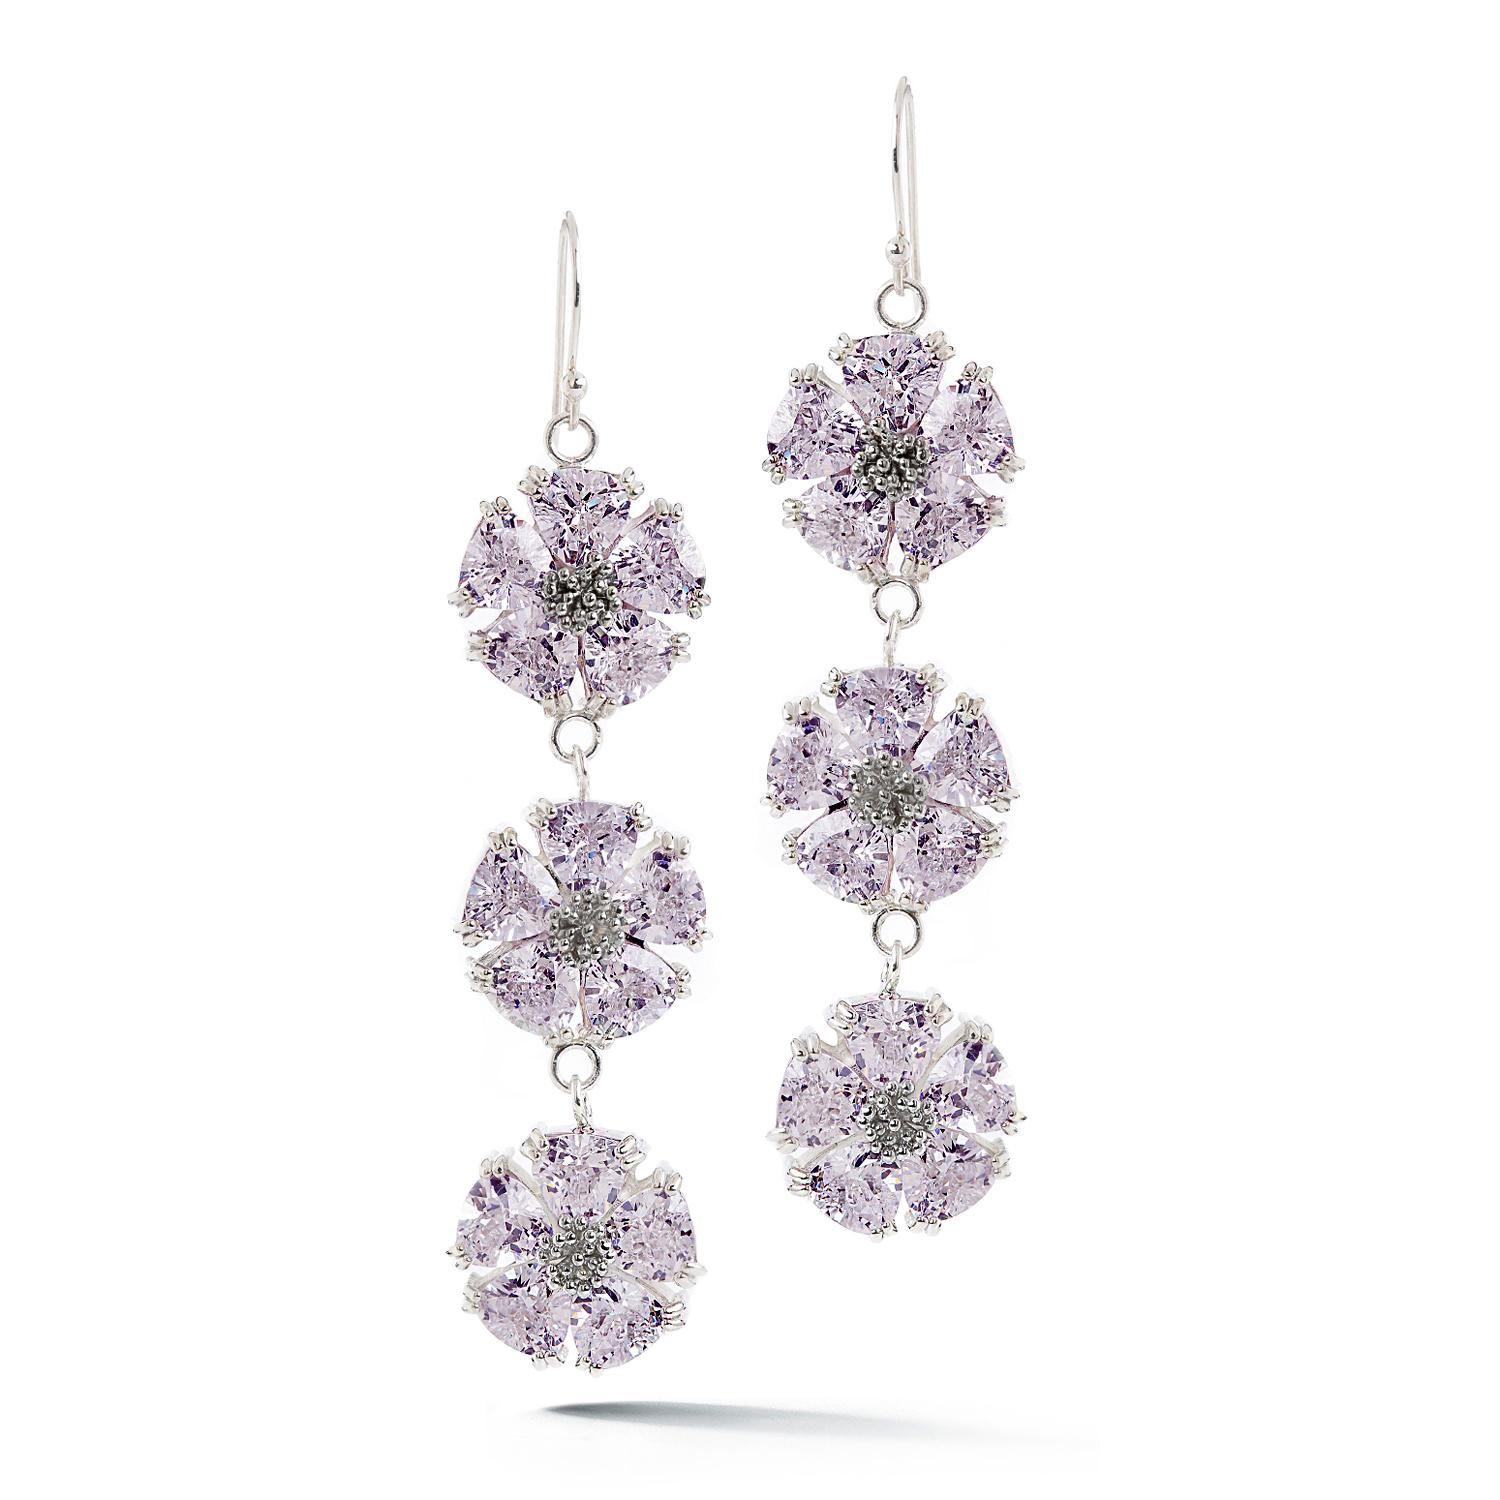 Designed in NYC

.925 Sterling Silver 30 x 7 mm Light Blue Sapphire Triple Stone Blossom Bling Earrings. No matter the season, allow natural beauty to surround you wherever you go. Triple blossom stone bling earrings: 

Sterling silver 
High-polish